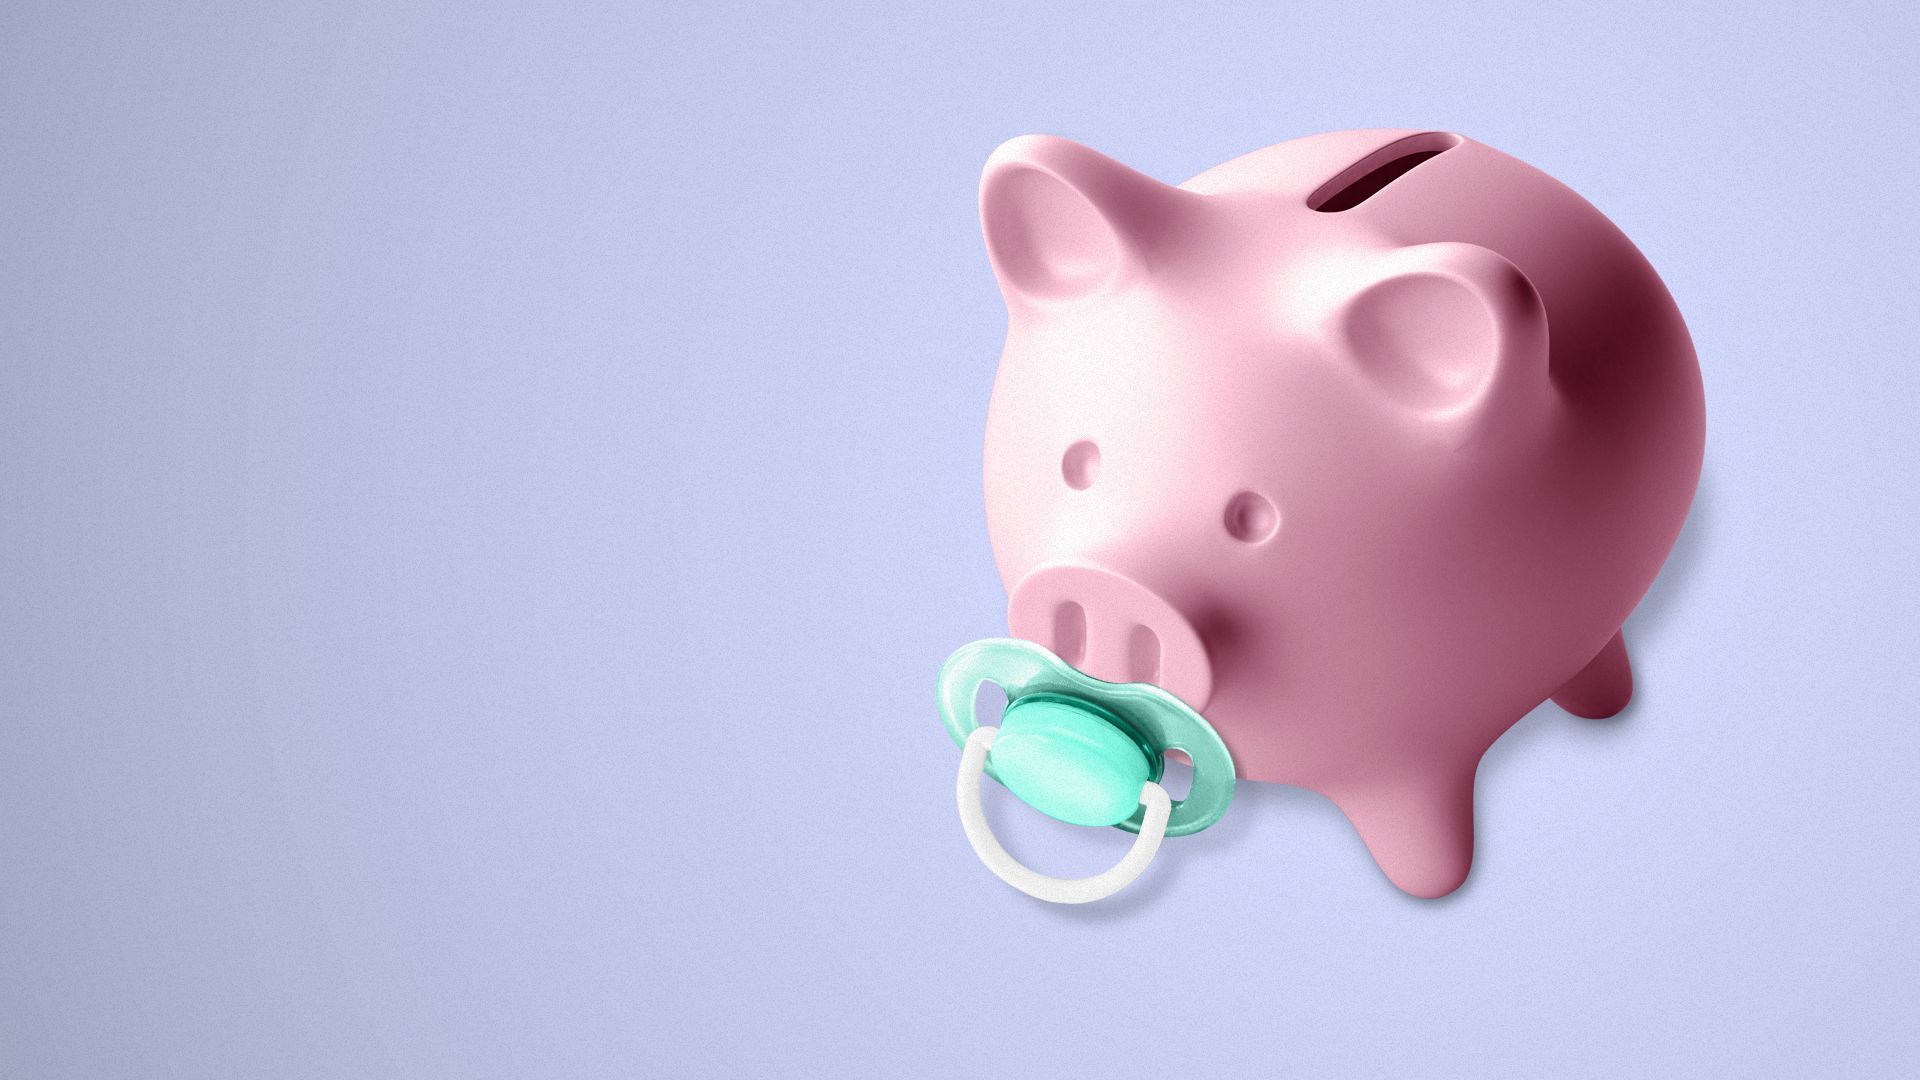 Illustration of a piggy bank with a pacifier in their mouth.